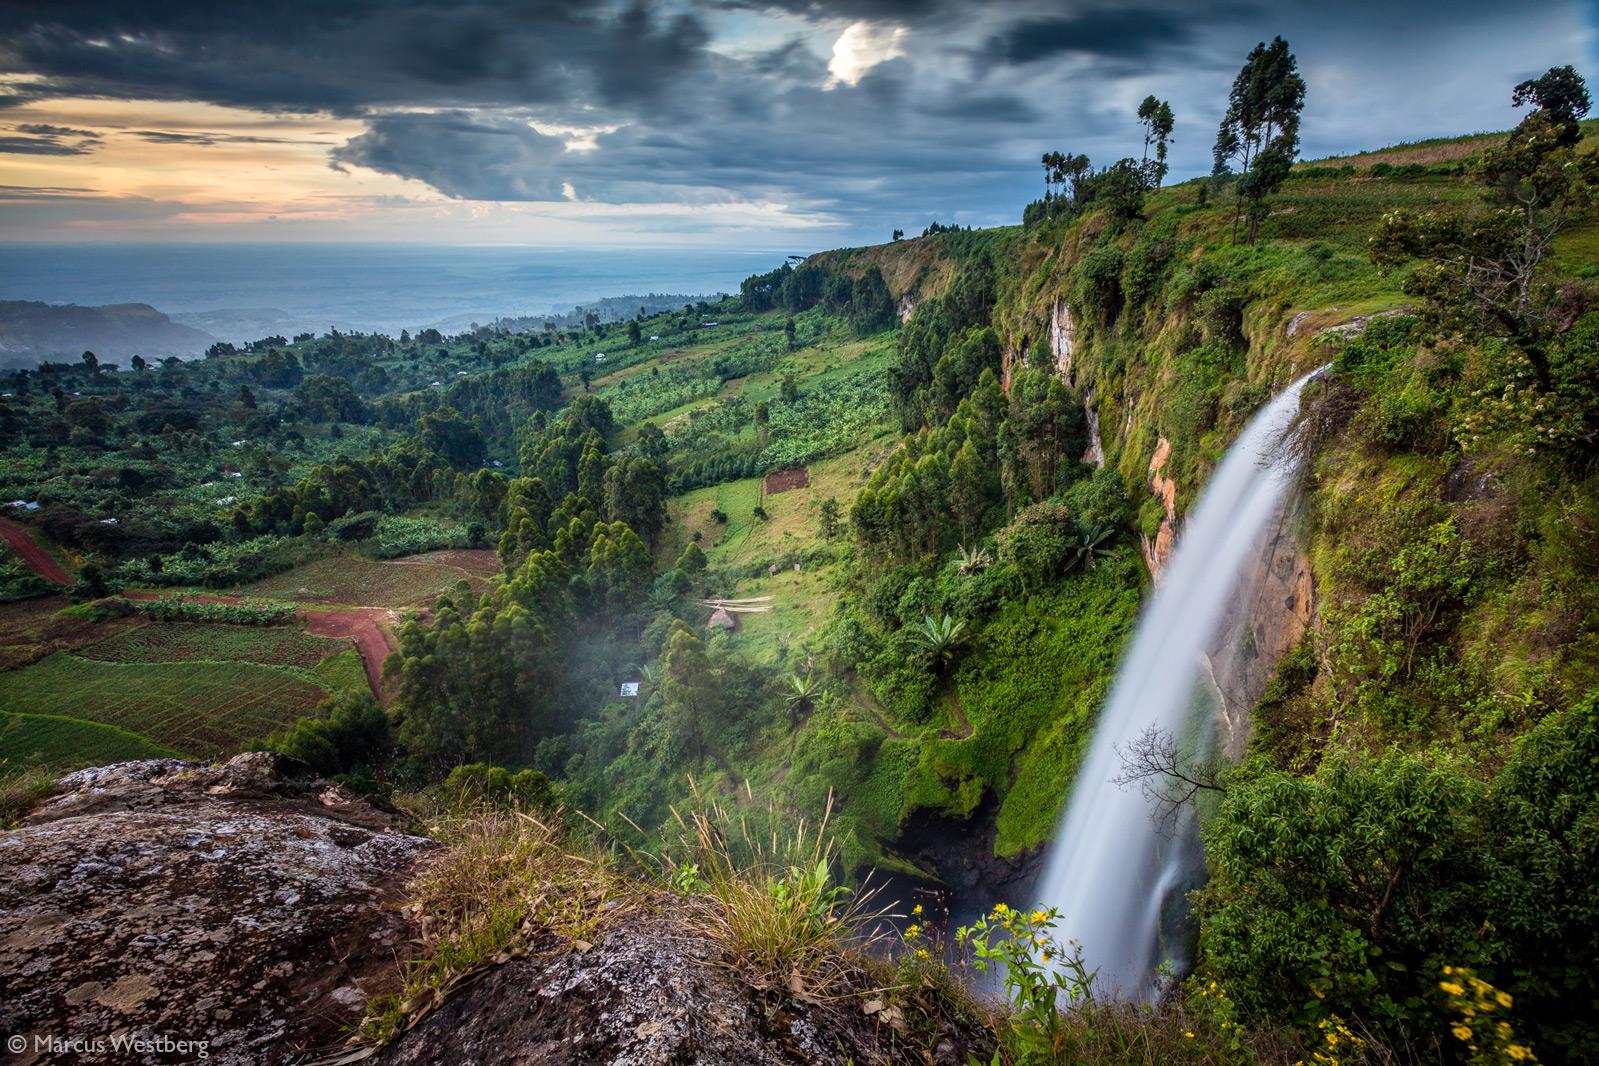 A side view of Sipi Falls on the foothills of Mount Elgon. Credit: Join Up Safaris